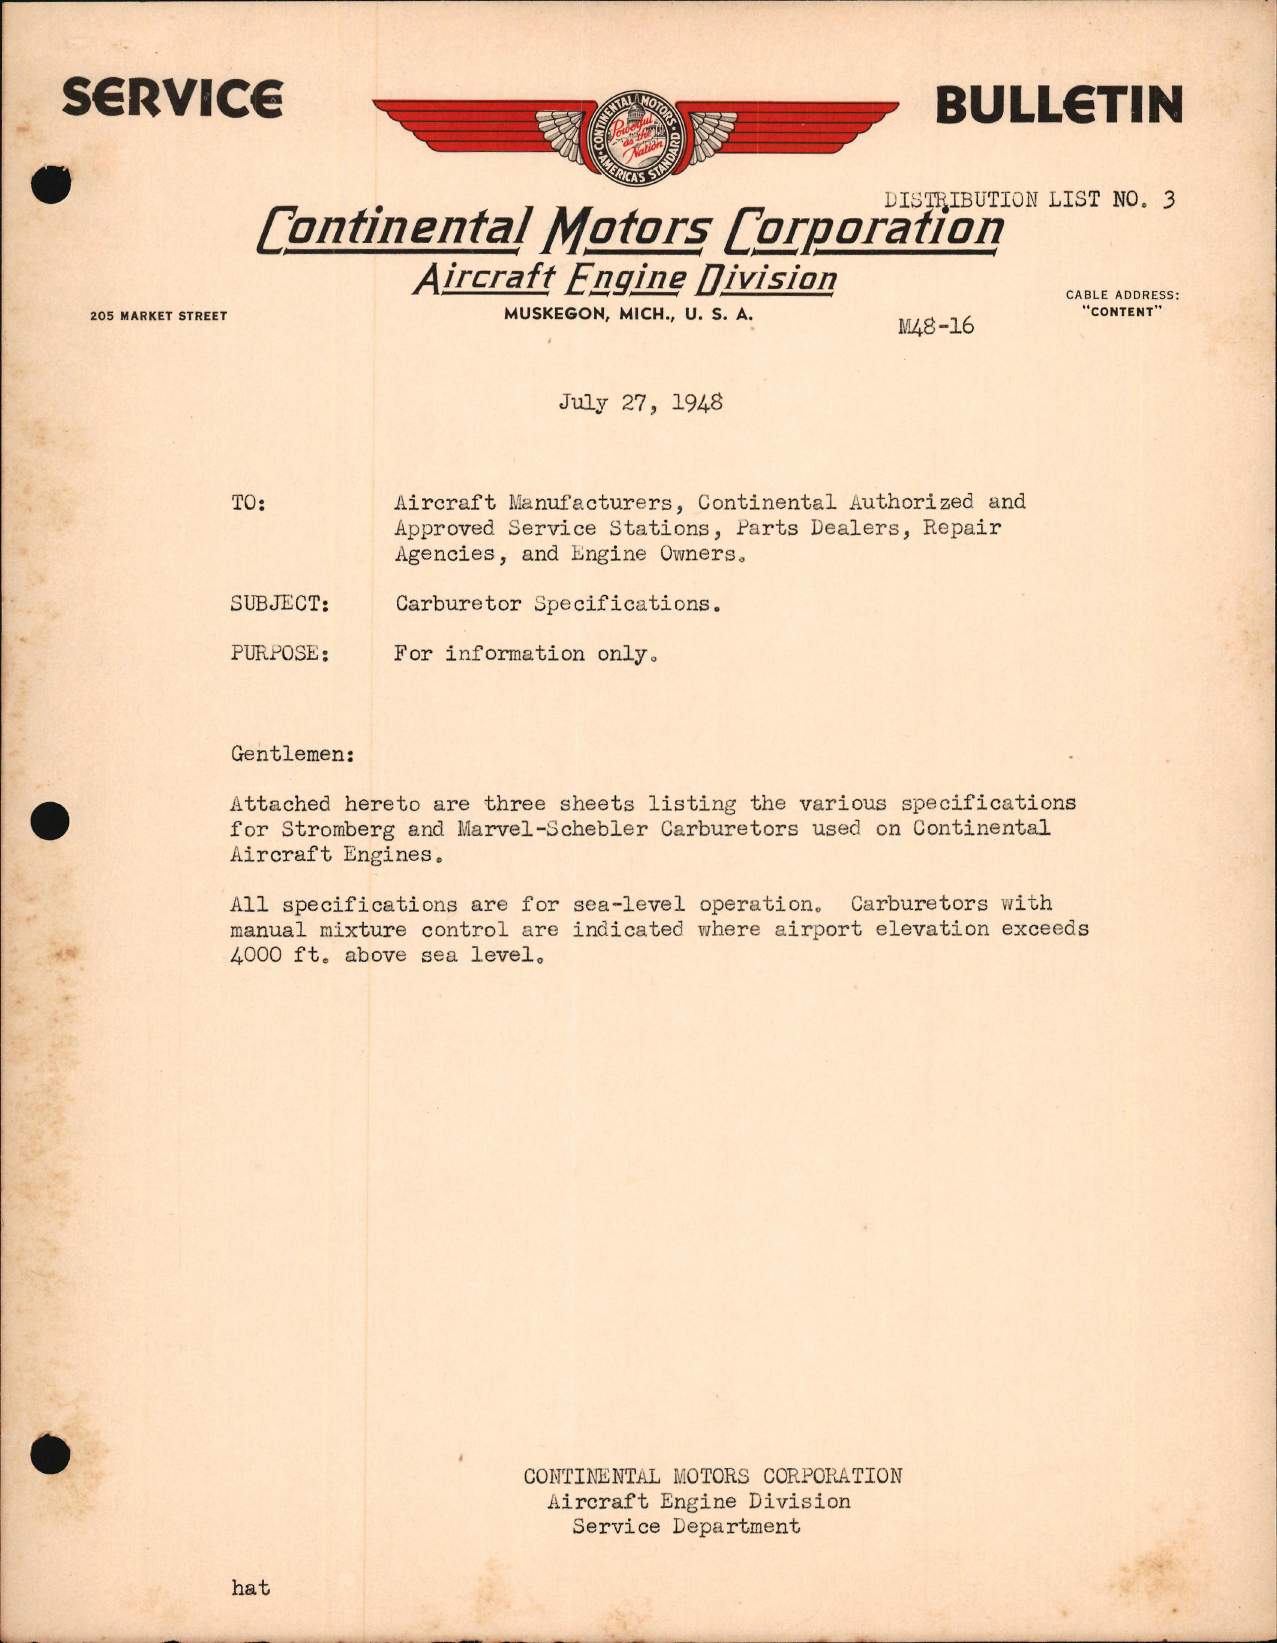 Sample page 1 from AirCorps Library document: Carburetor Specifications